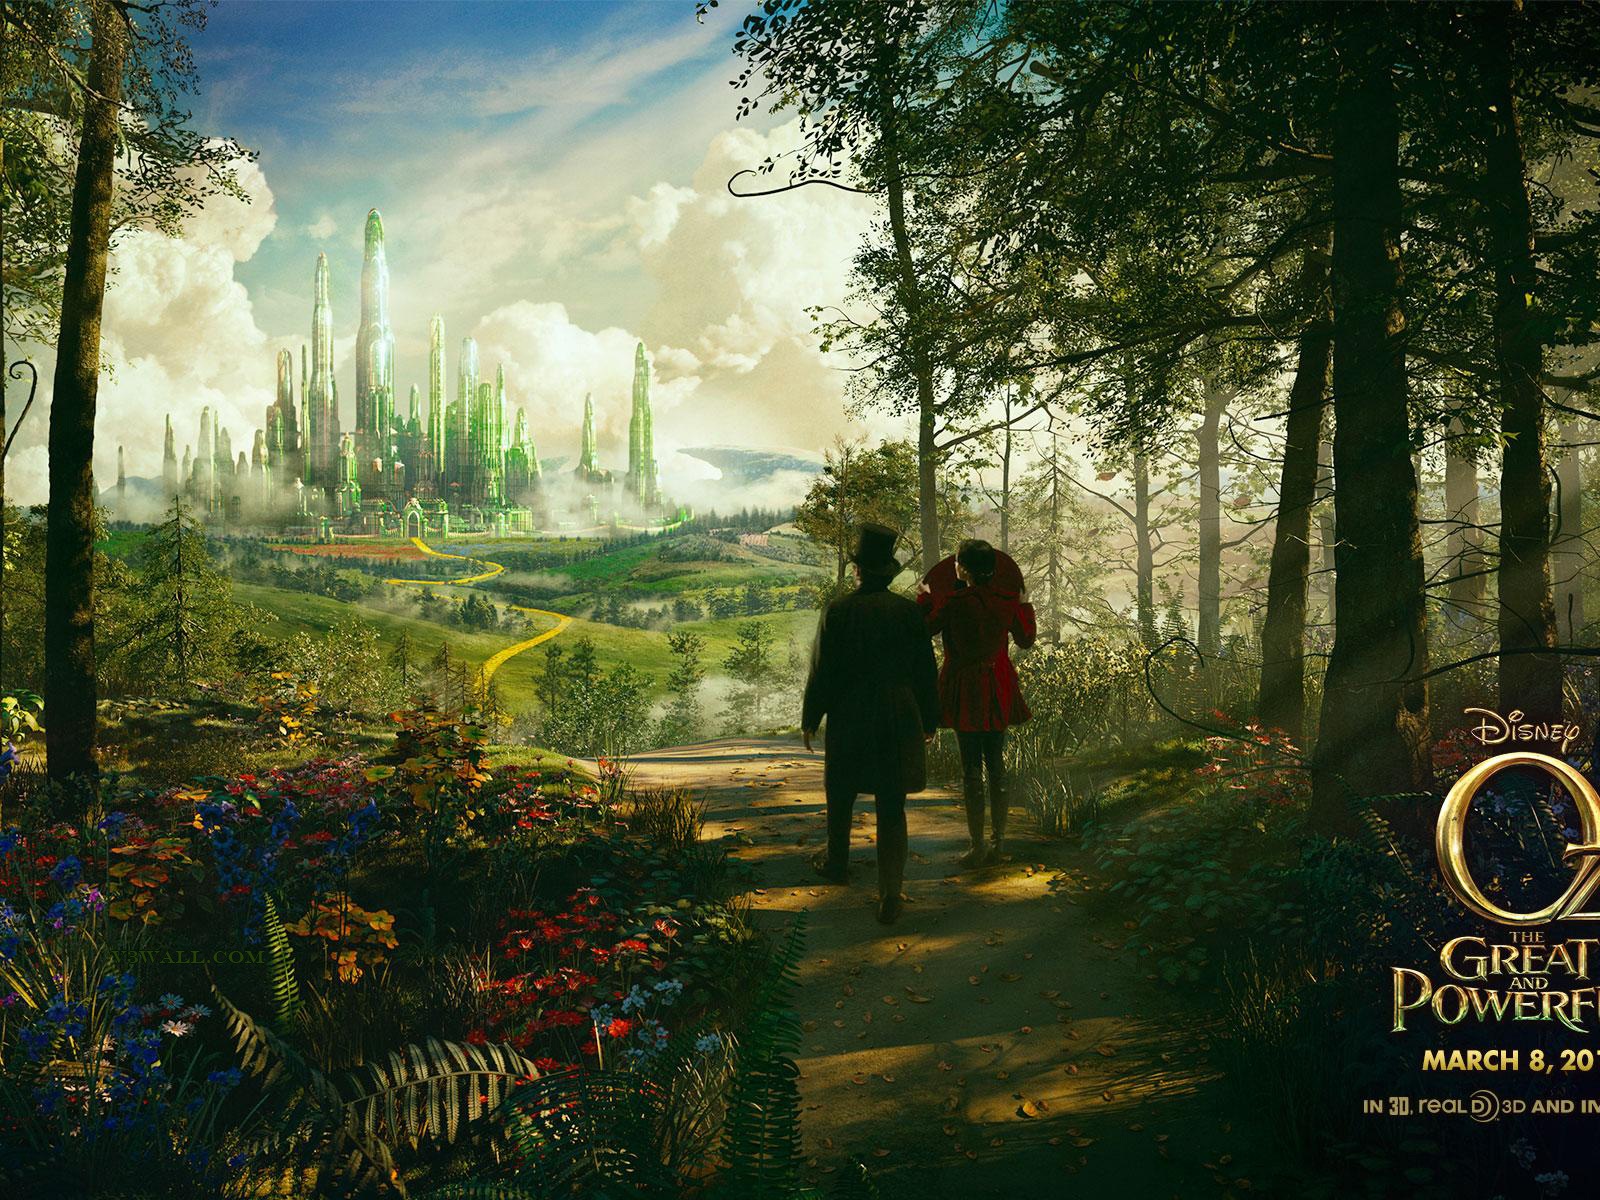 Oz The Great and Powerful 2013 HD wallpapers #11 - 1600x1200